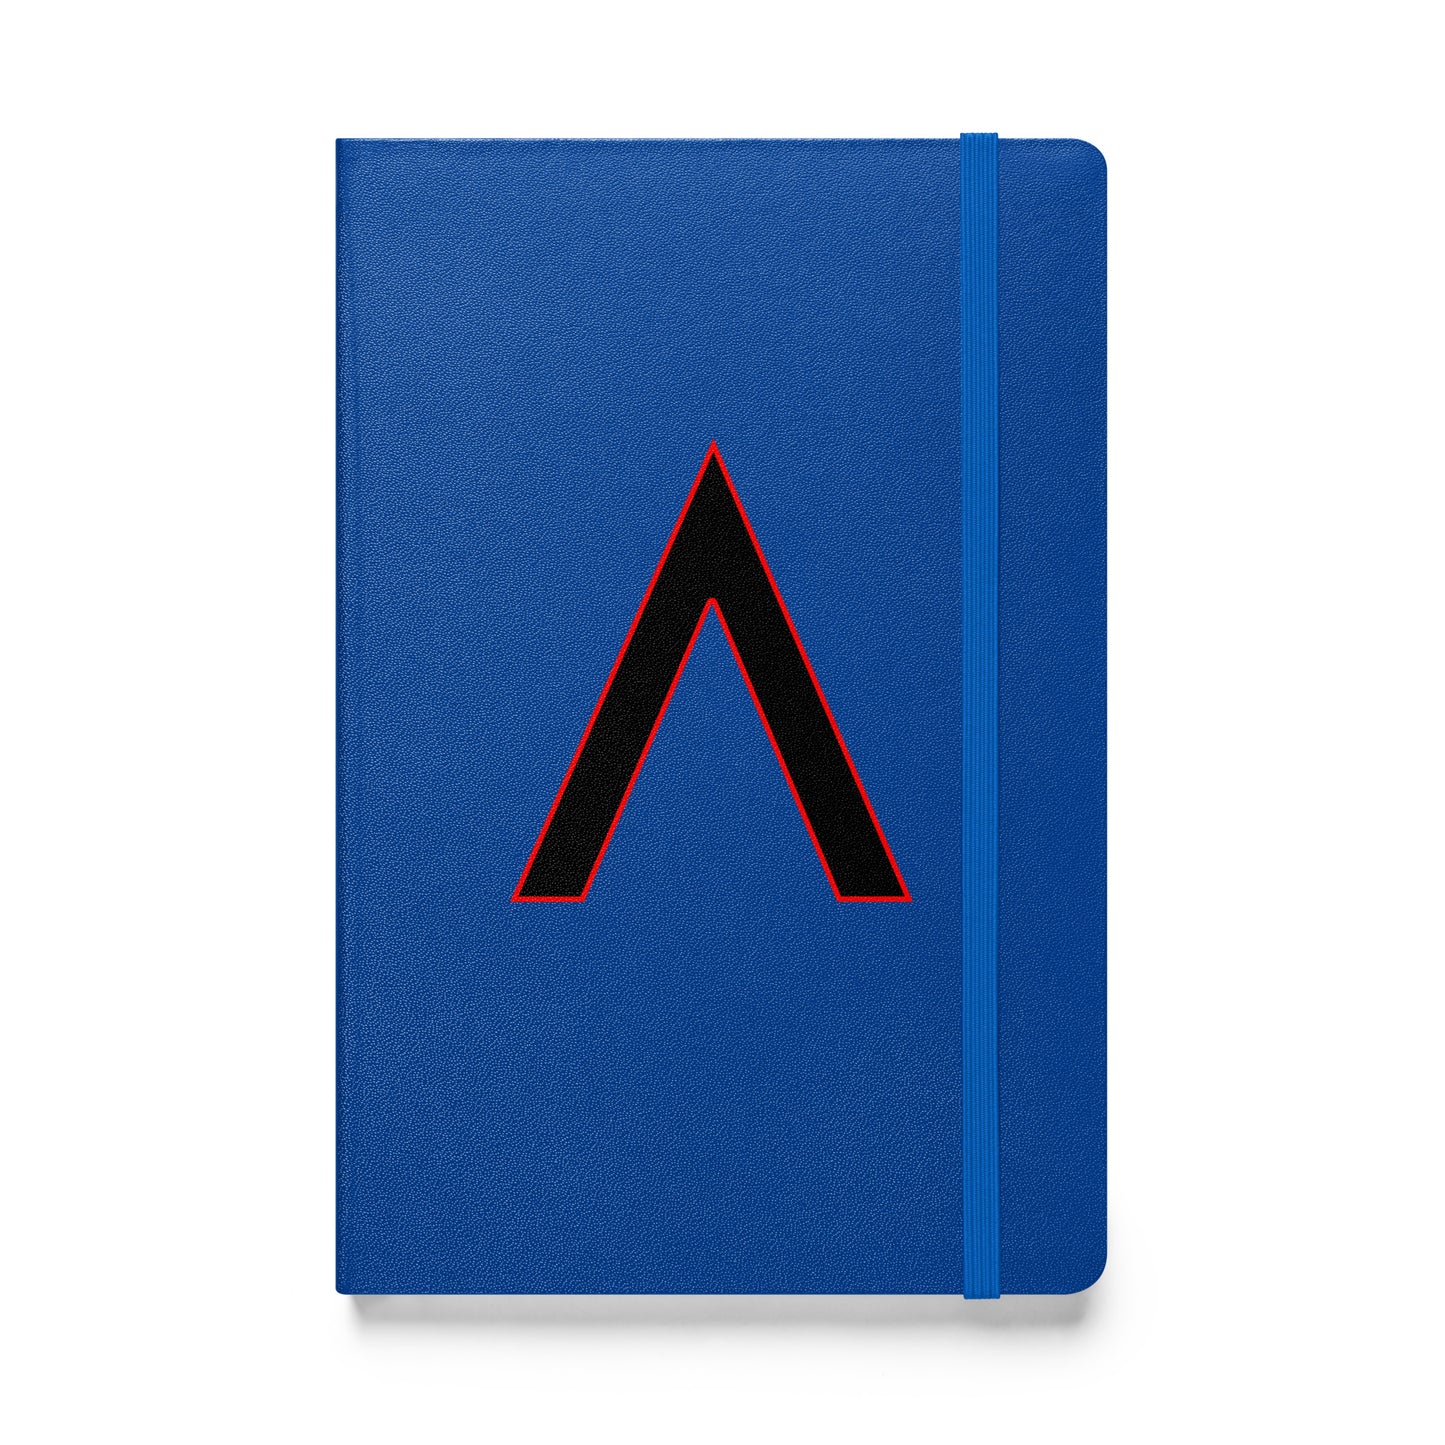 The Triangle - Hardcover bound notebook